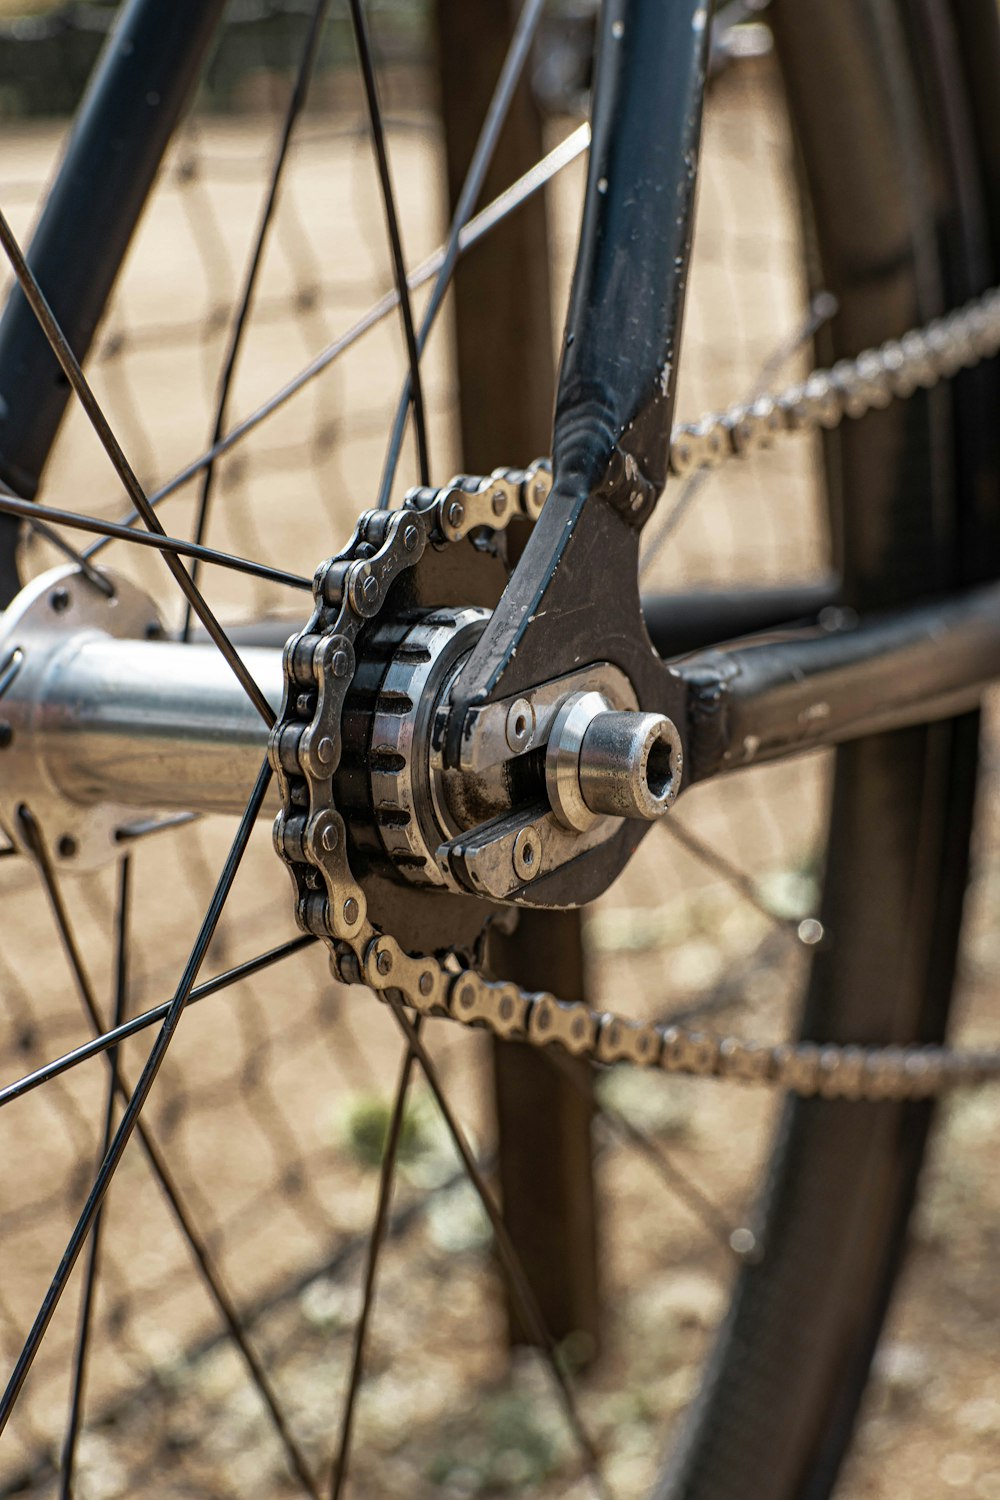 a close up of a bike's chain and gear